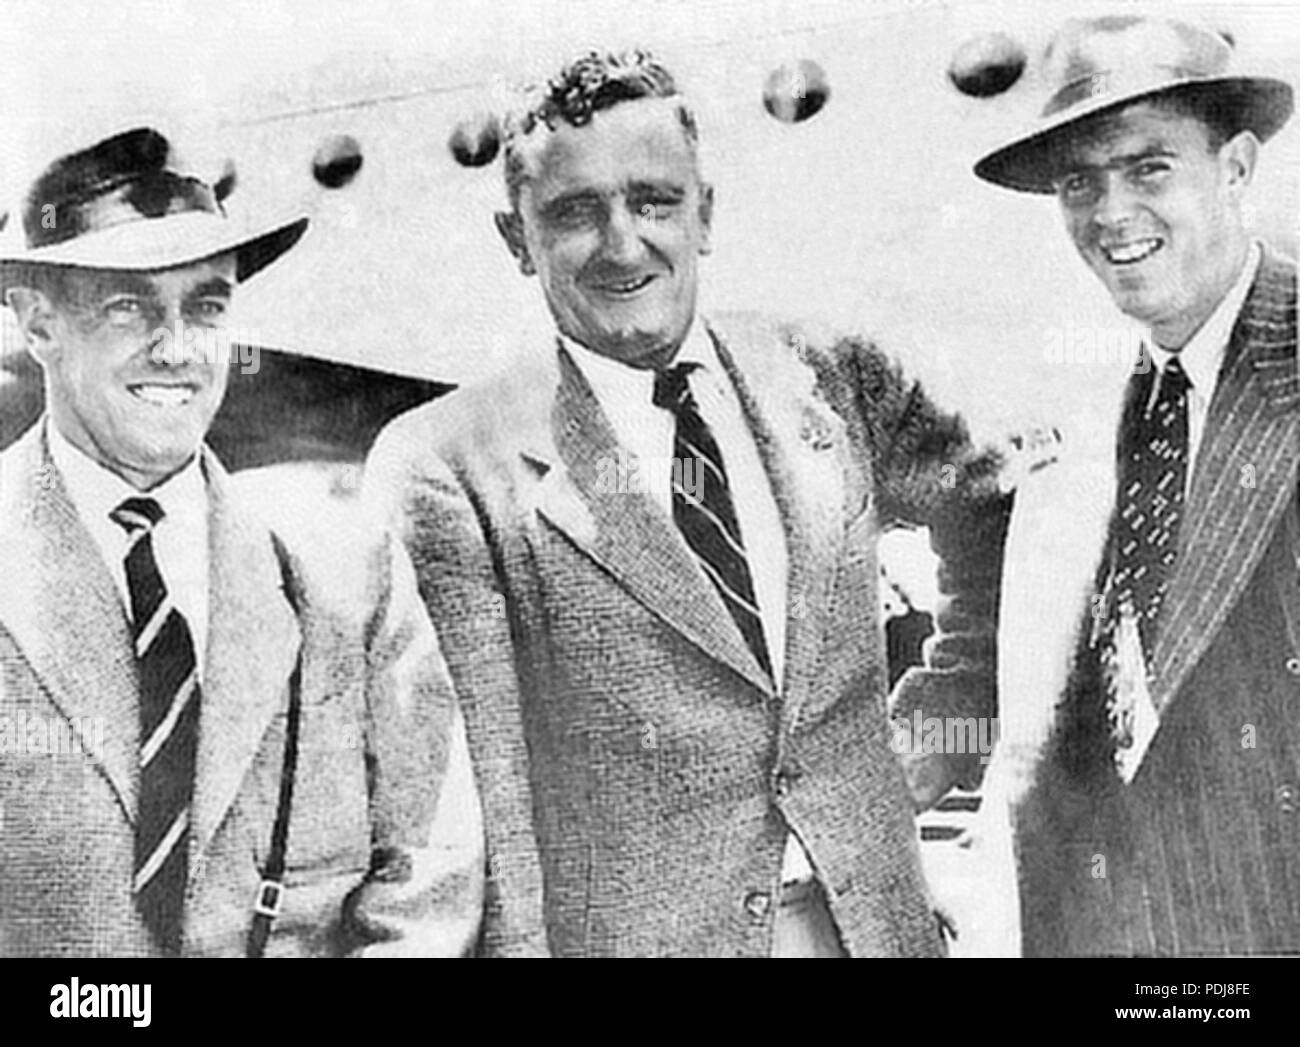 69 Jack Iverson flanked by Ian Johnson (cricketer) and Bill Johnston (cricketer) in January 1951 Stock Photo